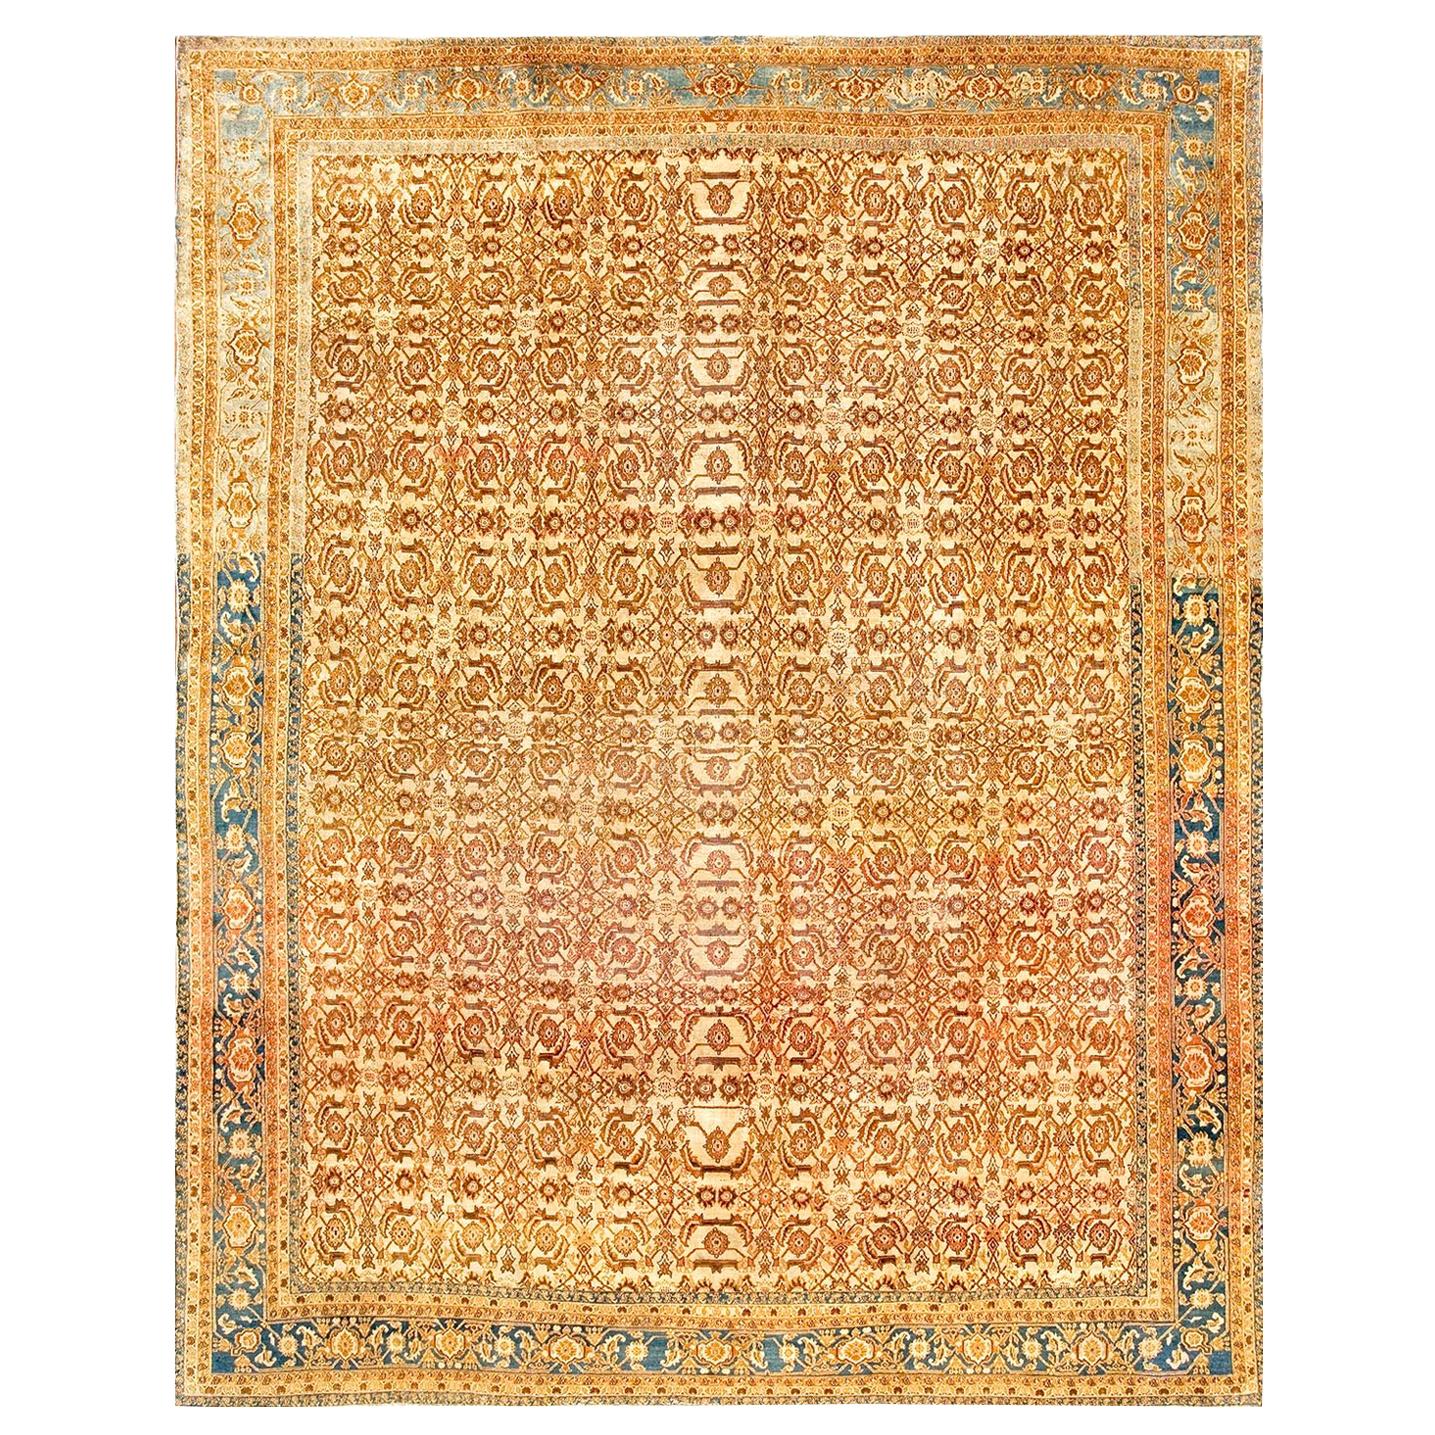 Early 20th Century N. Indian Agra Carpet ( 9' x 11'4" - 275 x 345 )